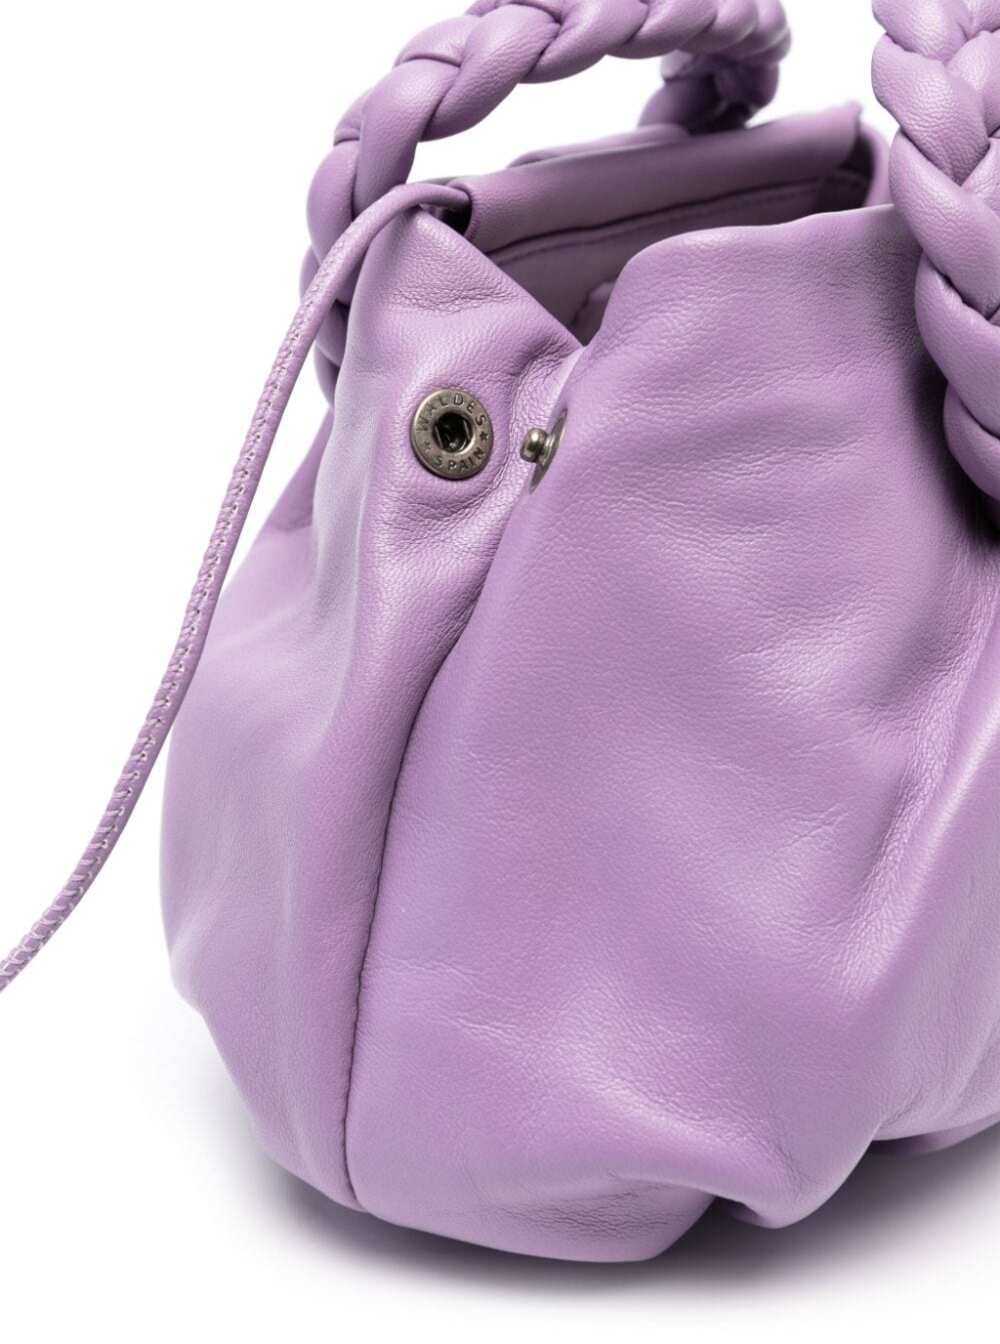 Shop Hereu Bombon Purple Handbag With Braided Handles In Shiny Leather Woman In Violet